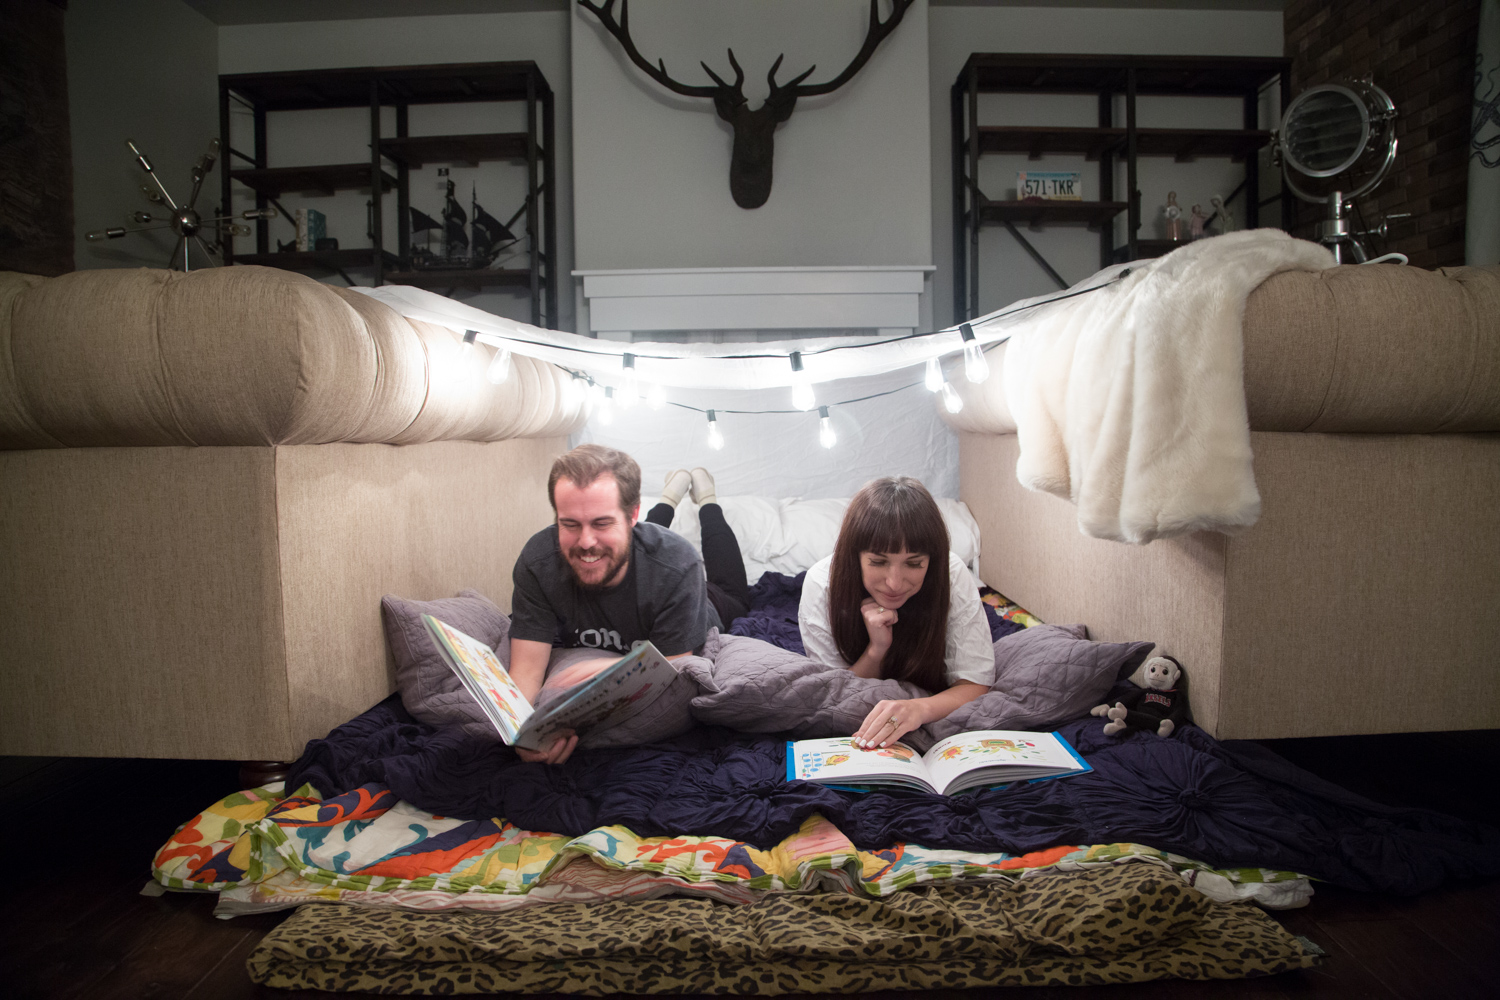 How to Build an awesome couch fort